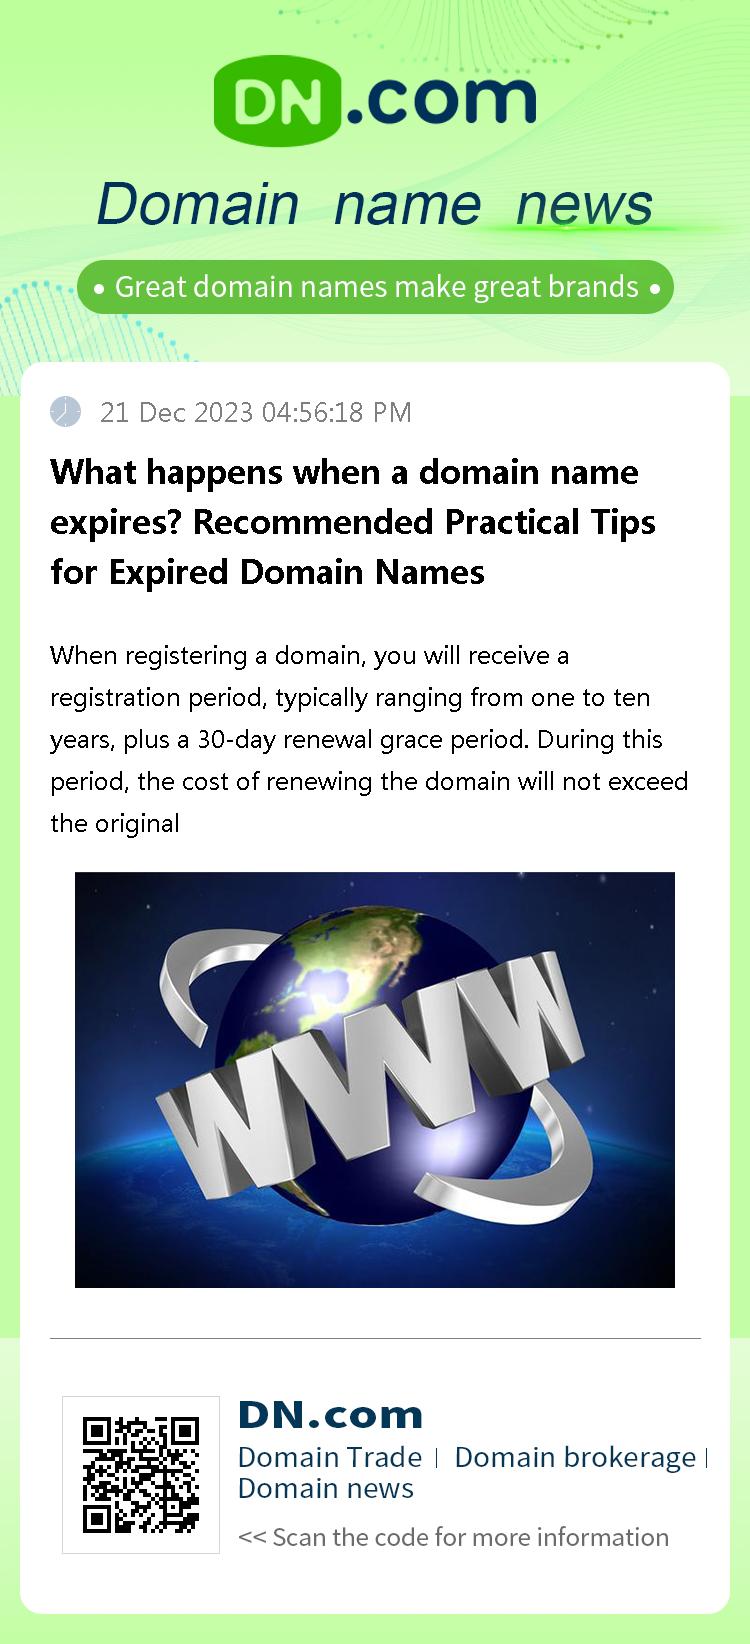 What happens when a domain name expires? Recommended Practical Tips for Expired Domain Names